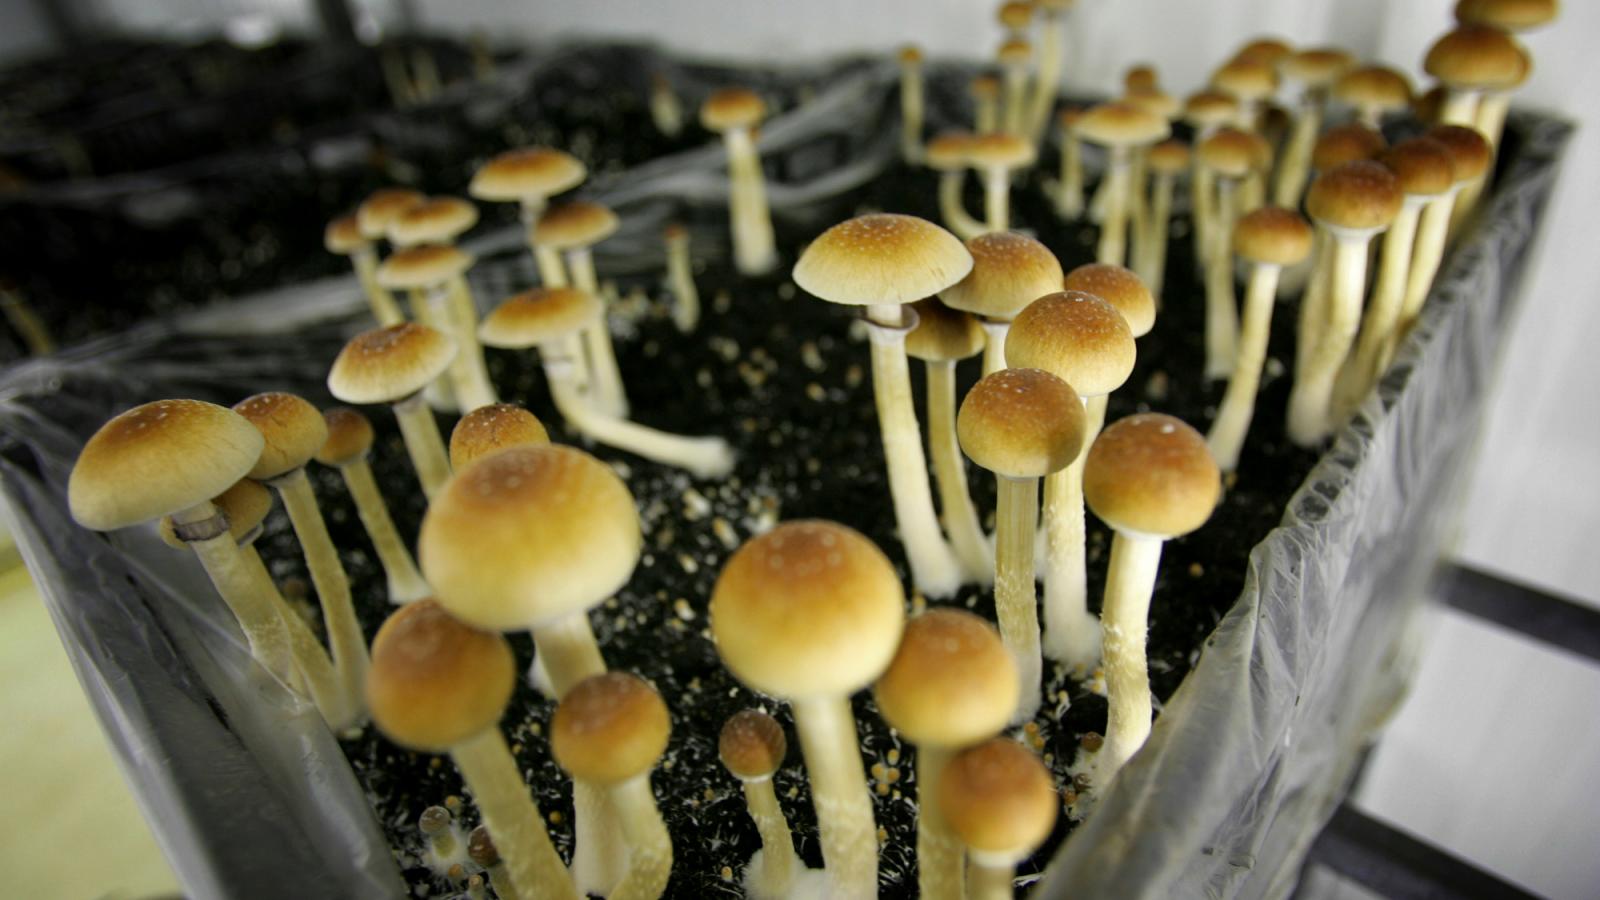 Don’t waste any more time and start your adventure of buy shrooms detriot through the best delivery service in the city